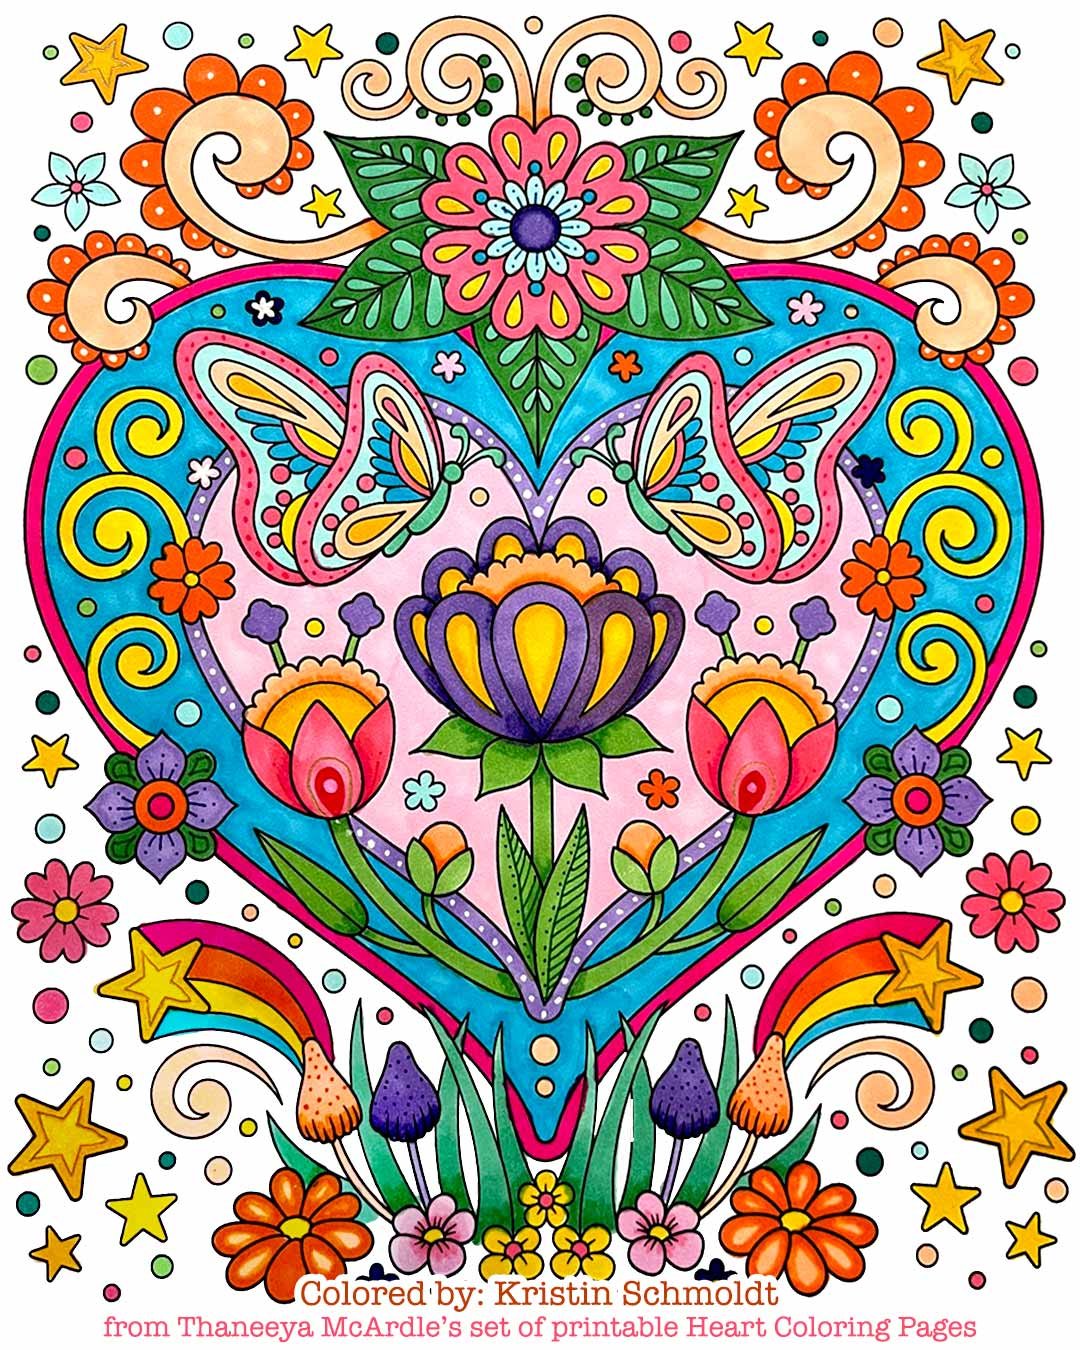 Whimsical Heart Coloring Page from Thaneeya McArdle's Set of 10 Printable Heart Coloring Pages